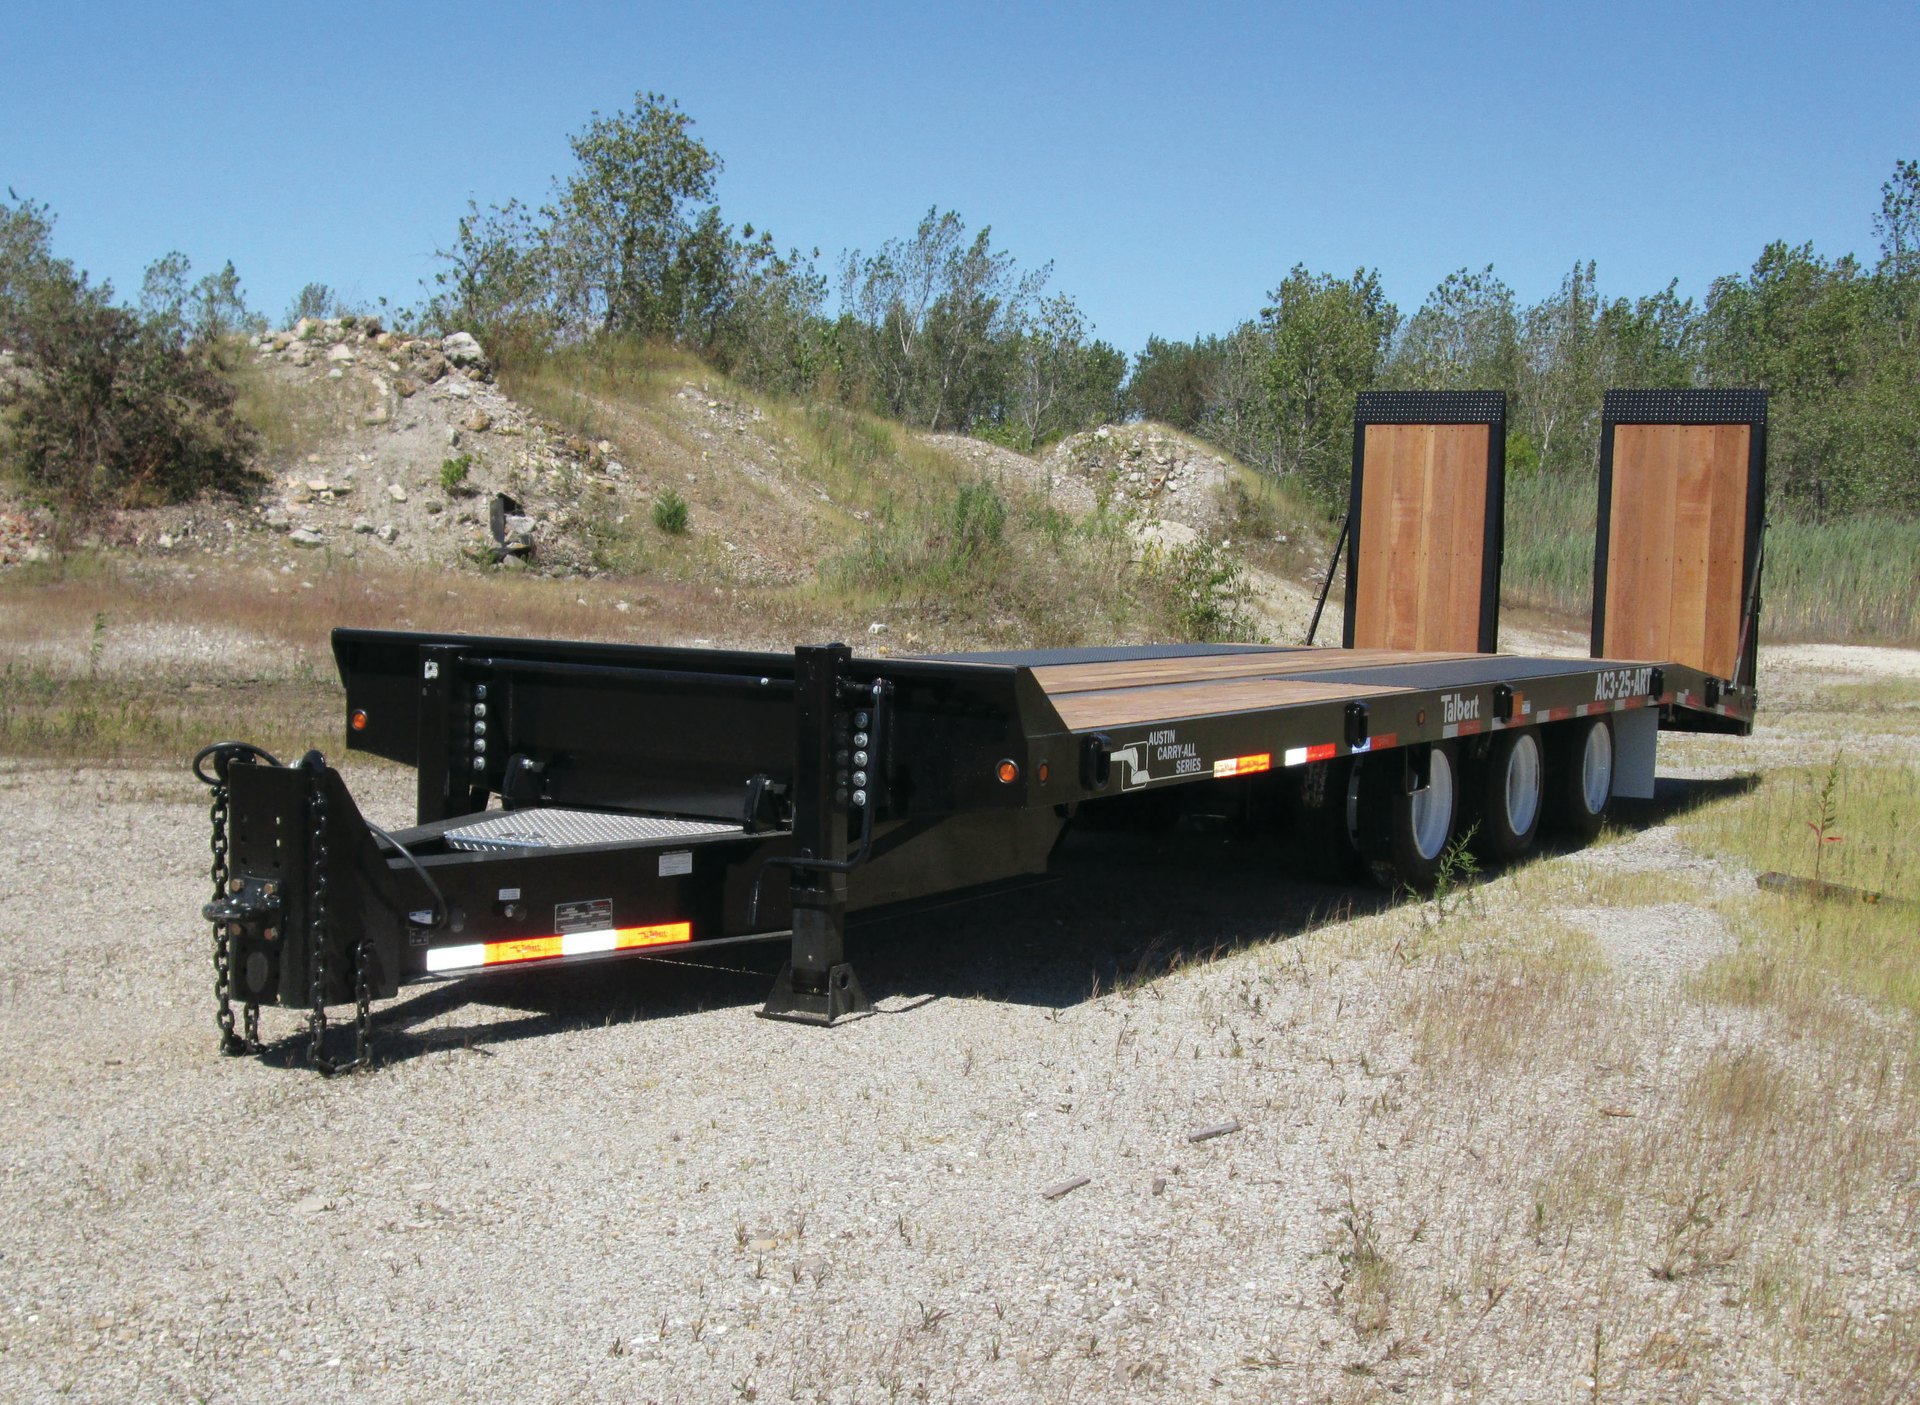 Some trailer options provide a lower center of gravity, allowing operators to safely transport their equipment under low clearances and maneuver around tight corners in urban and residential areas.